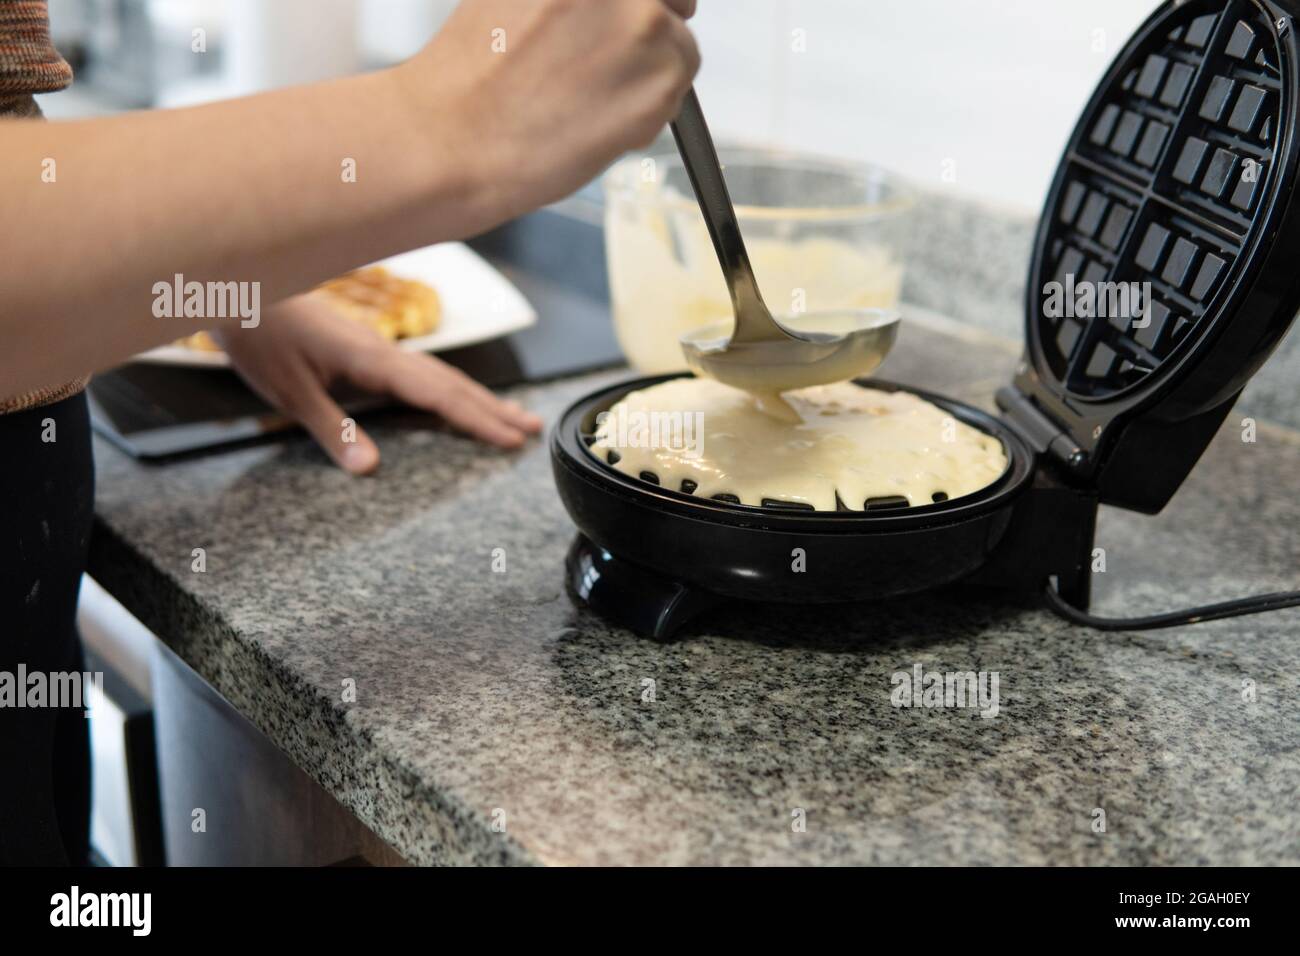 close-up of a hand placing waffle batter in the waffle iron Stock Photo